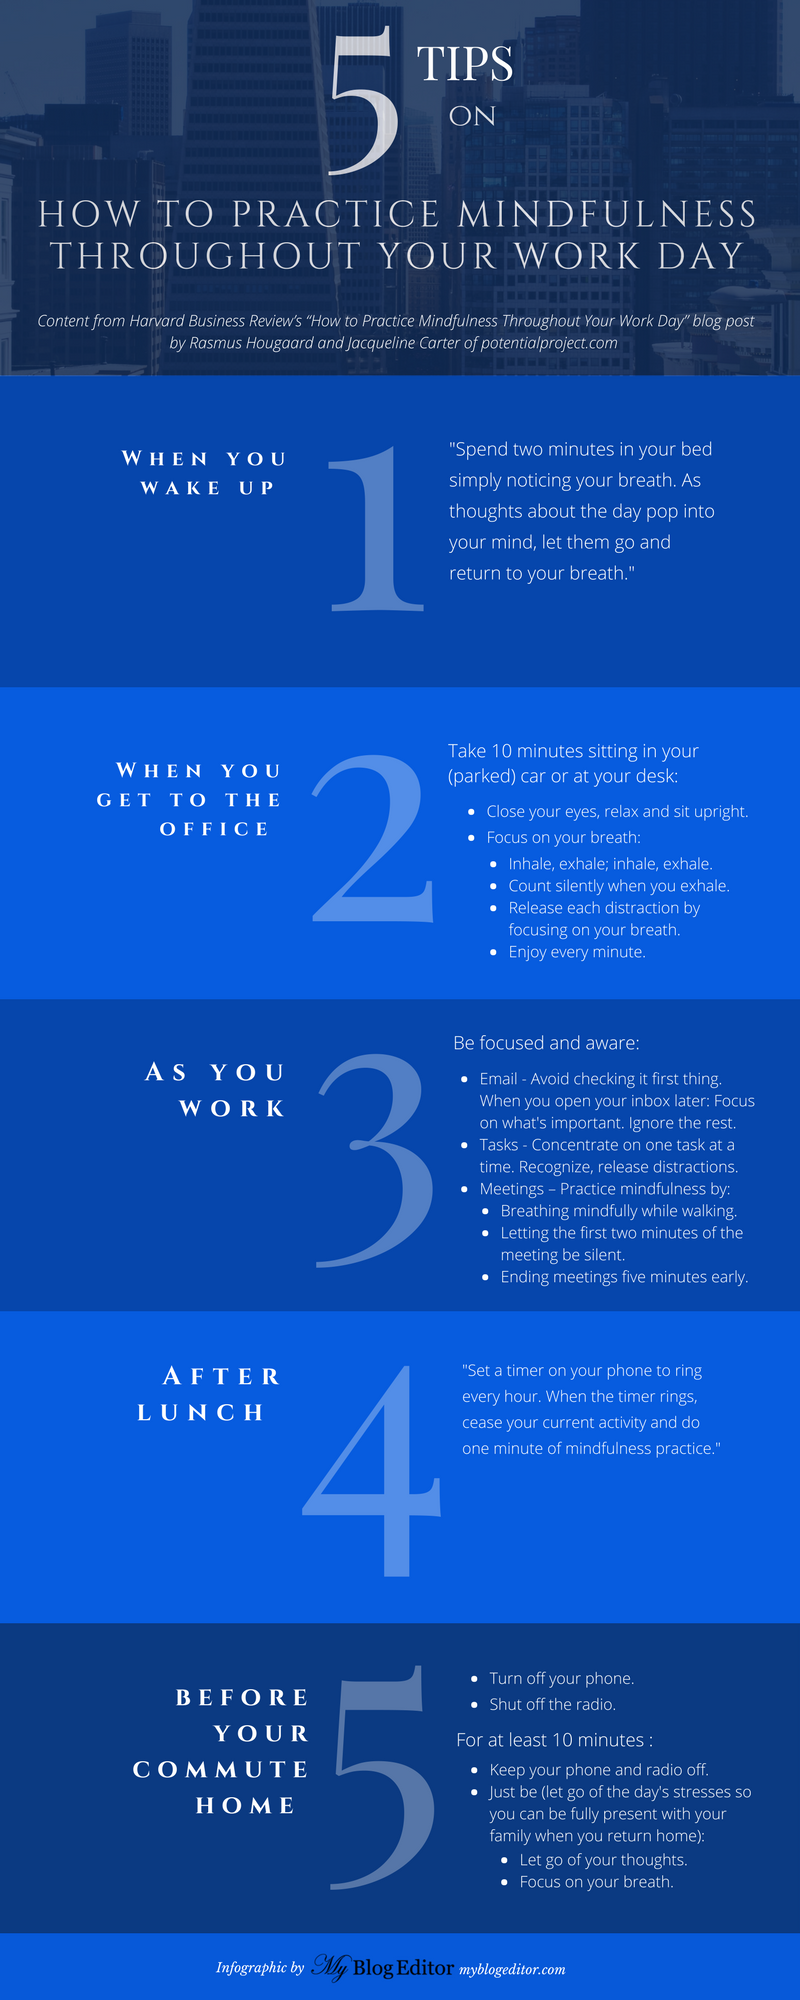 Myblogeditor.com infographic based on Harvard Business Review post: How to Practice Mindfulness Throughout Your Work Day